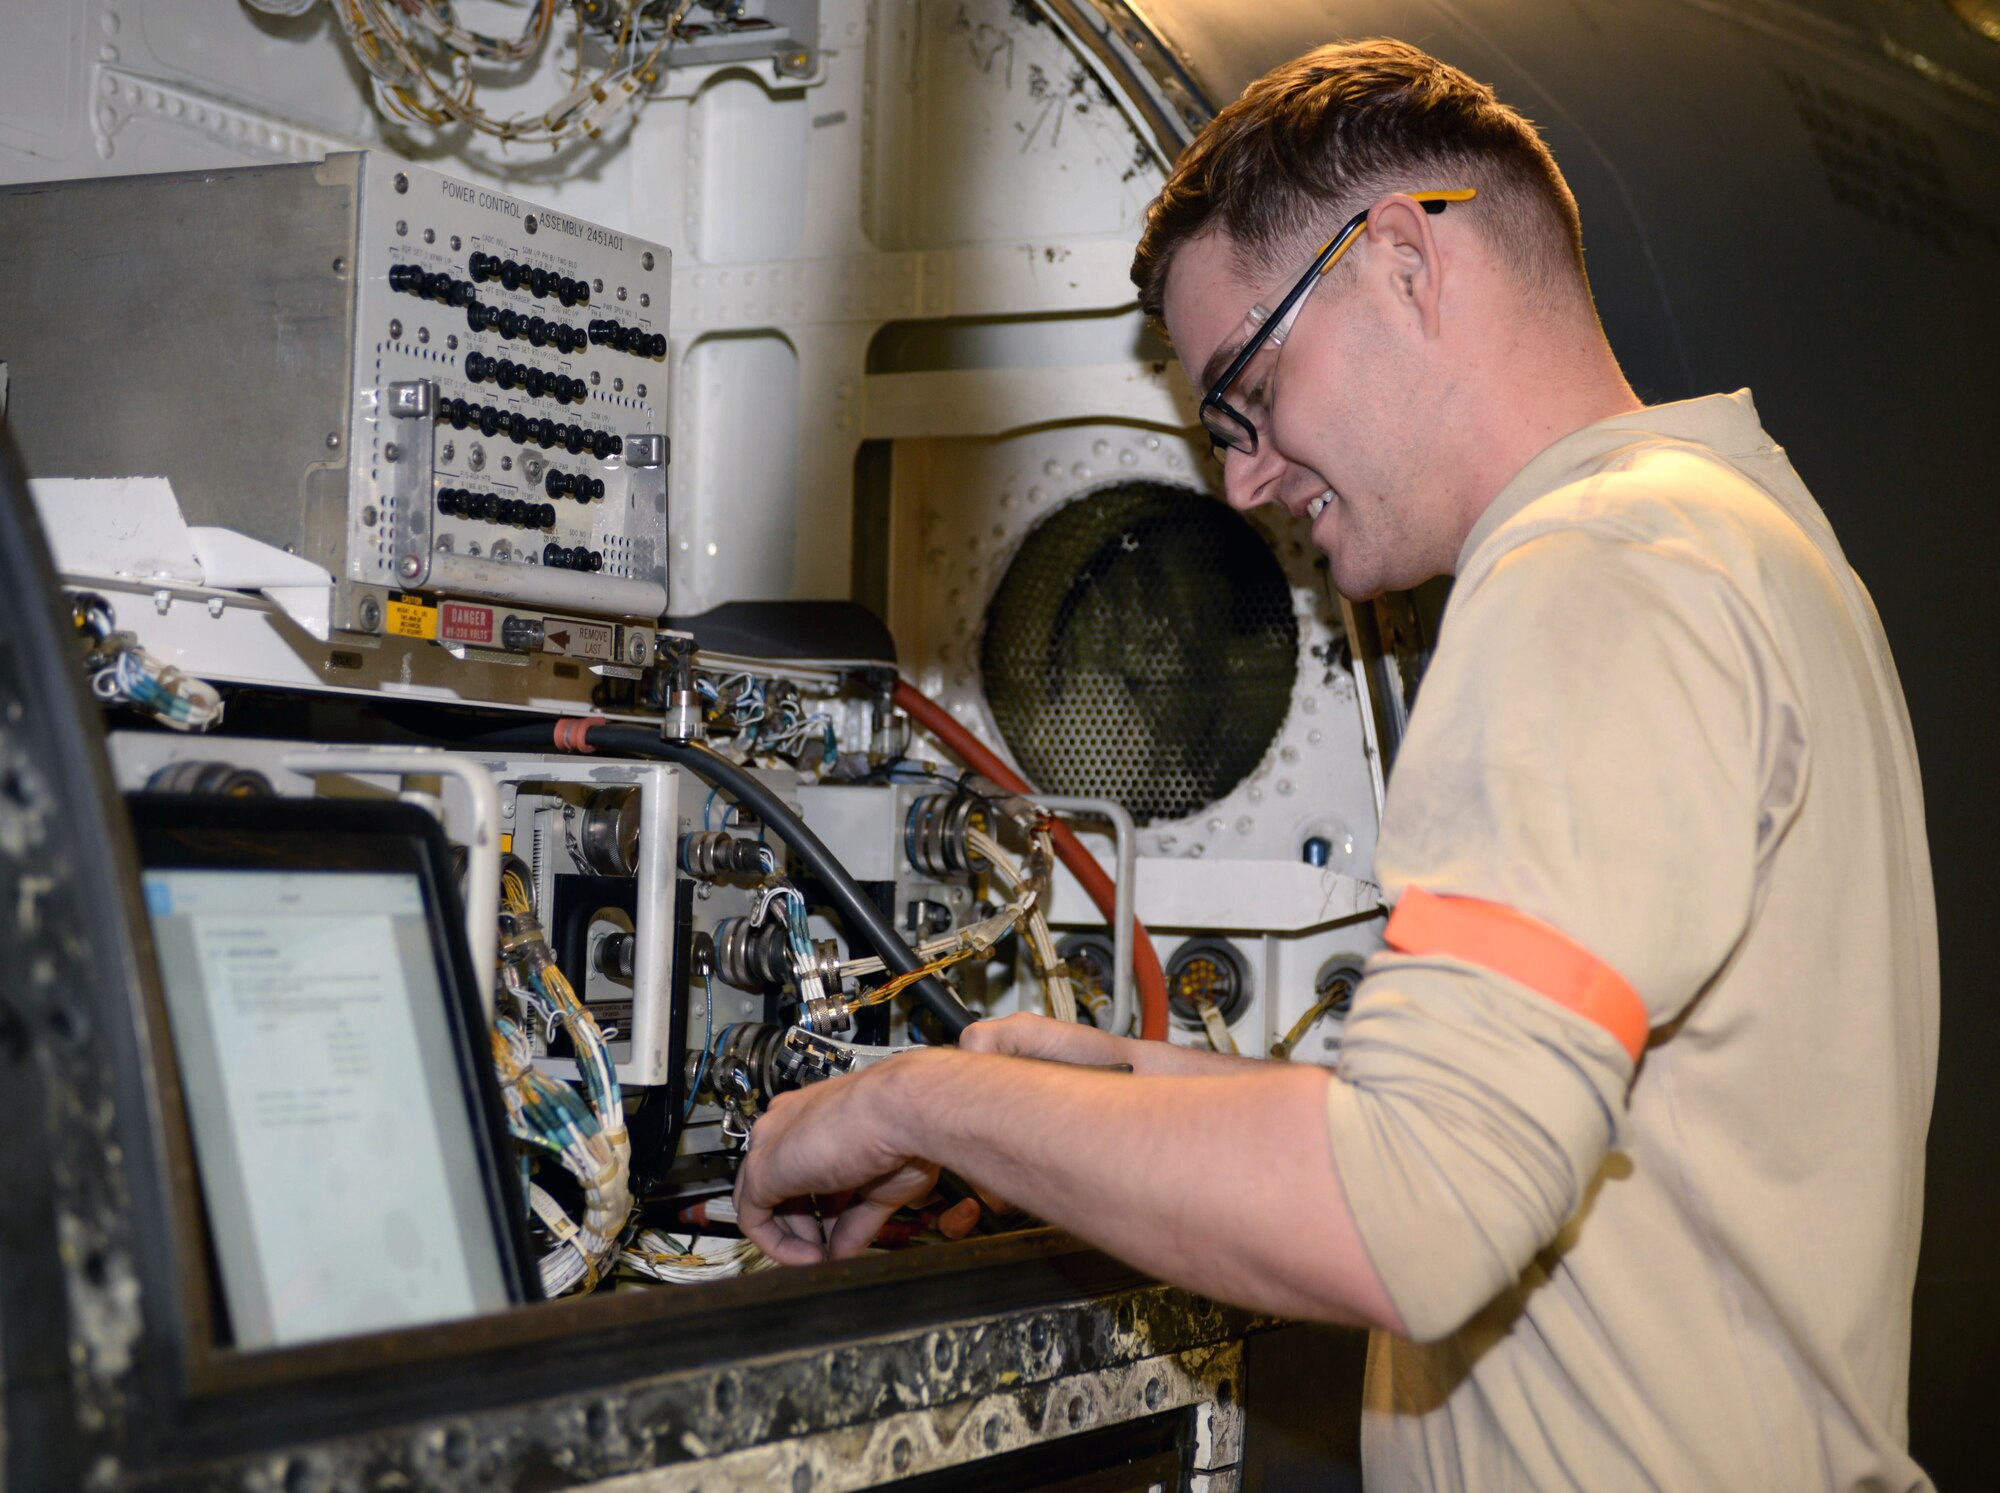 Airman 1st Class David Betchley, an aircraft electrical and environmental systems journeyman assigned to the 28th Maintenance Squadron, changes a volt amp sensor on a B-1 bomber at Ellsworth Air Force Base, S.D., March 8, 2017. After every 800 flight hours, Ellsworth’s bombers are sent to hangar 73 to receive an in-depth inspection process that lasts over the course of 20 days. (U.S. Air Force photo by Airman 1st Class Denise M. Jenson)